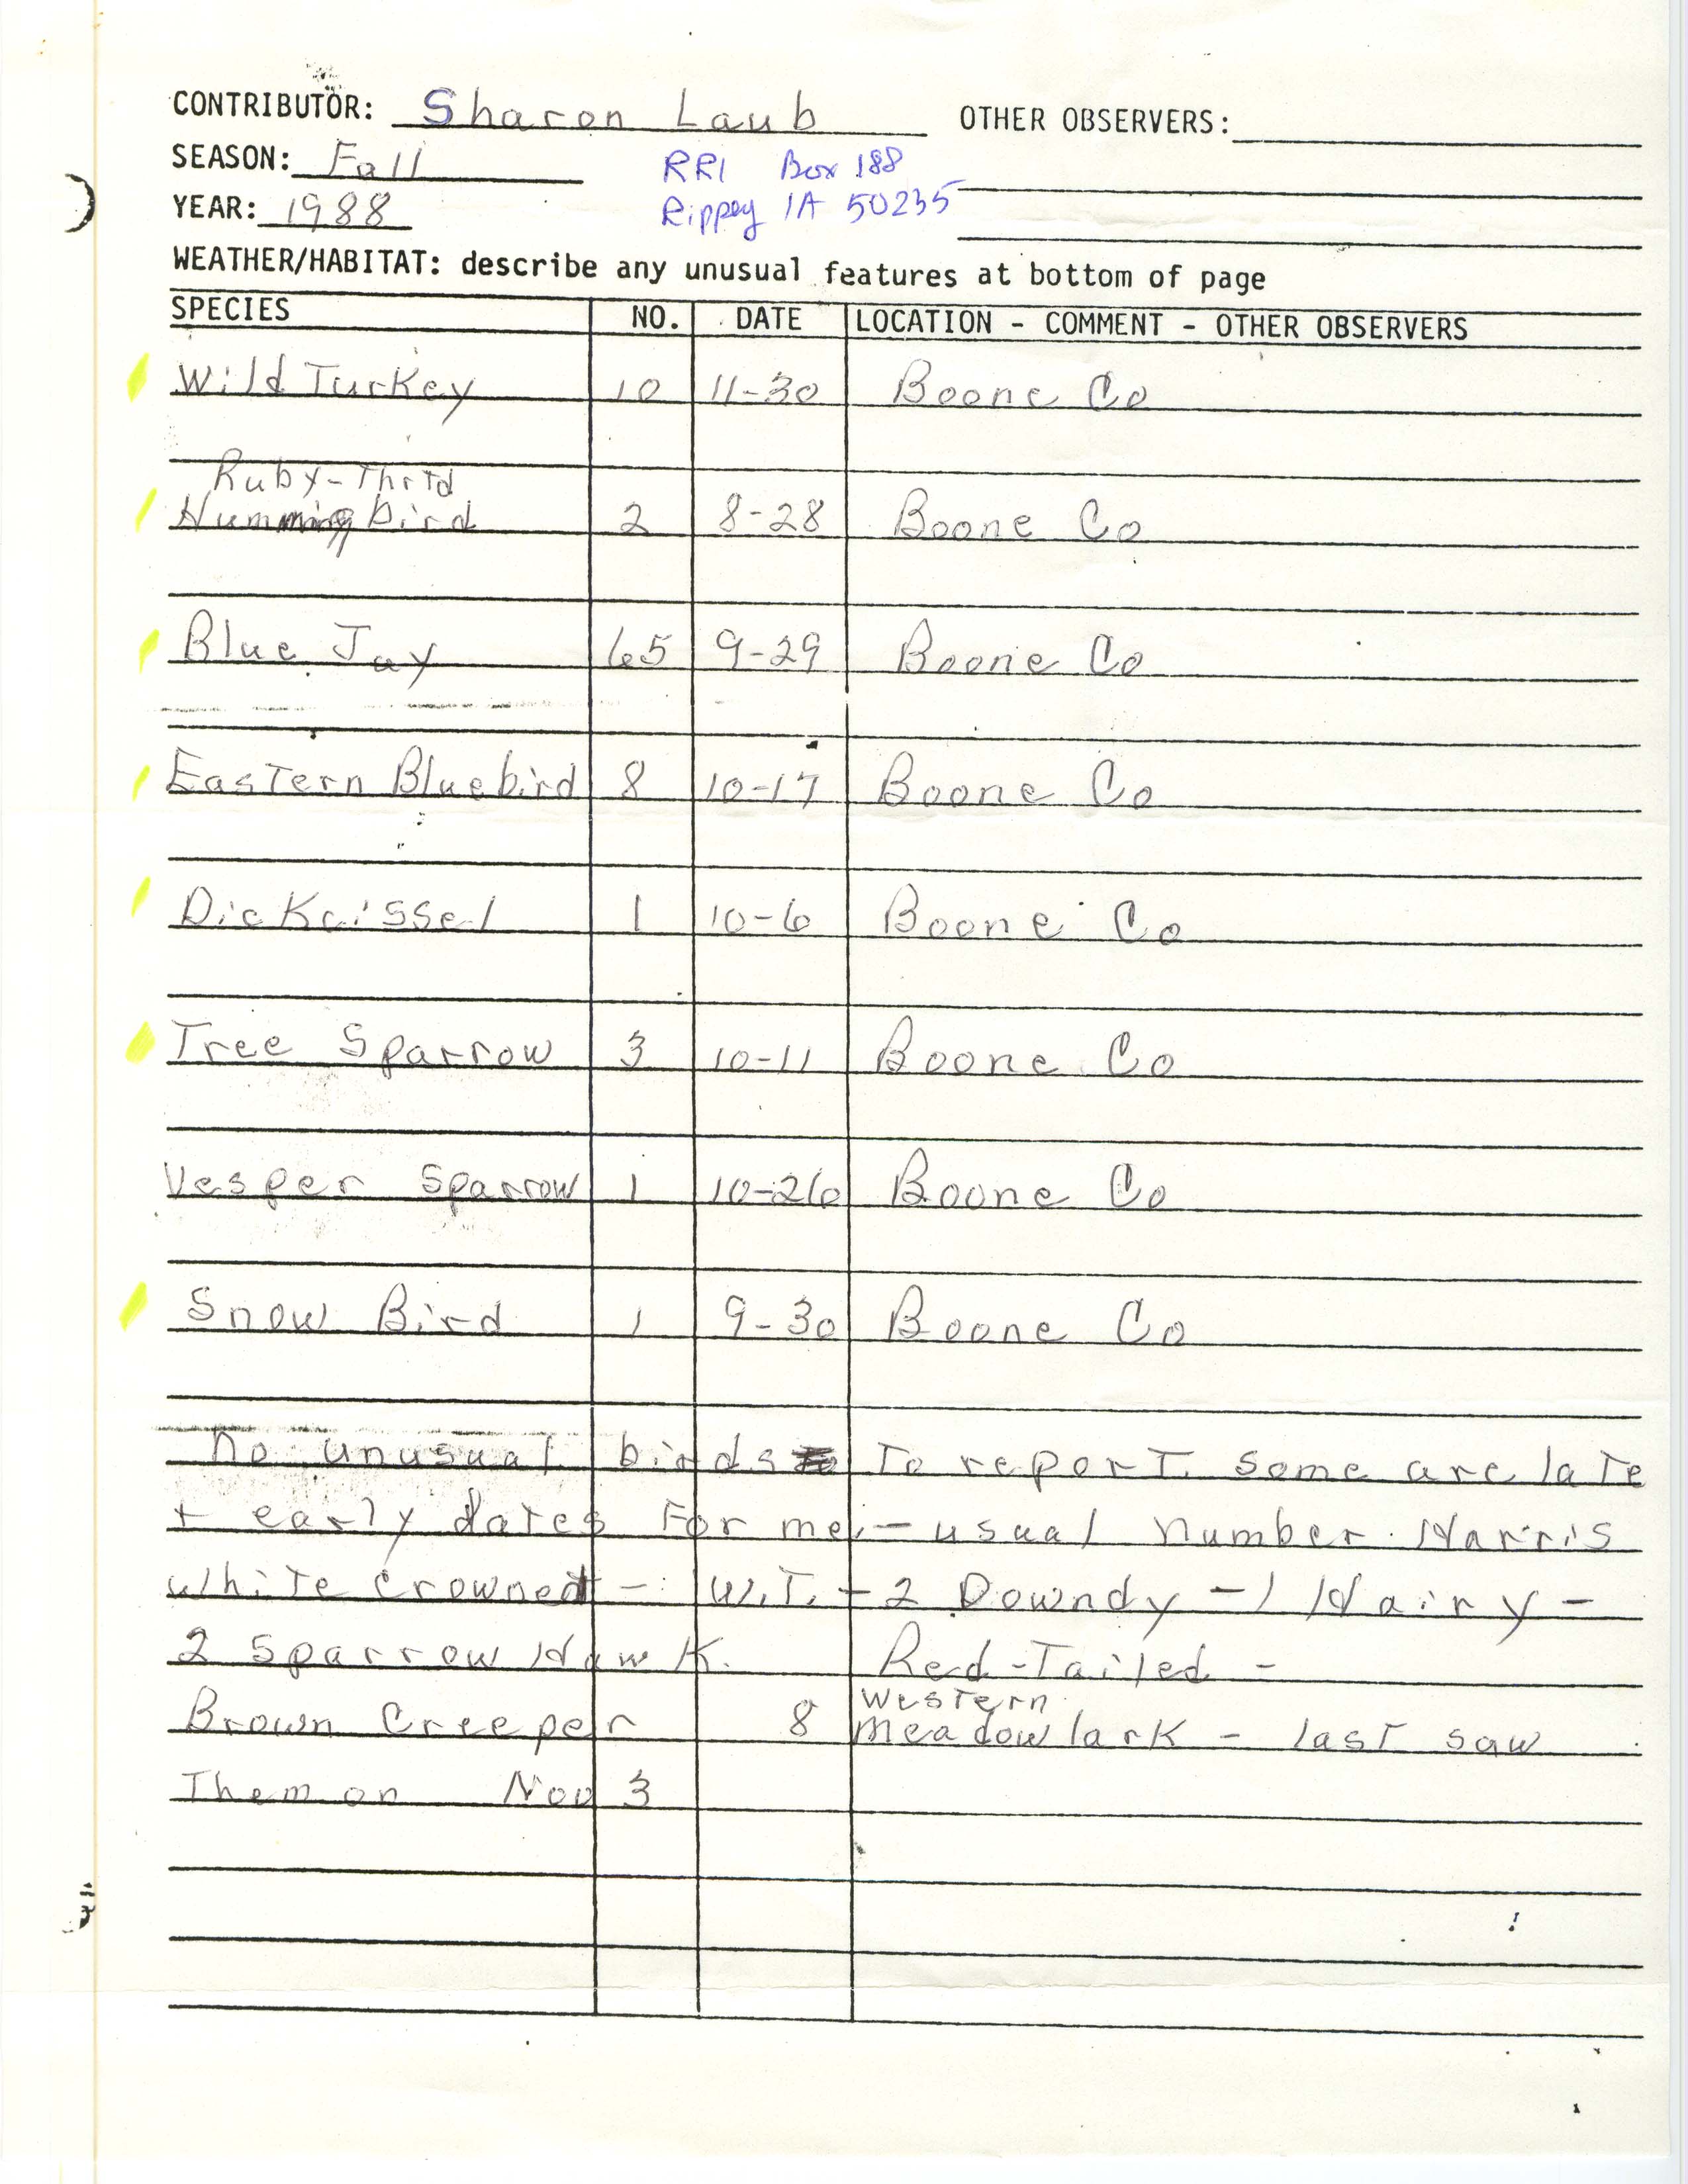 Field notes contributed by Sharon Laub, fall 1988